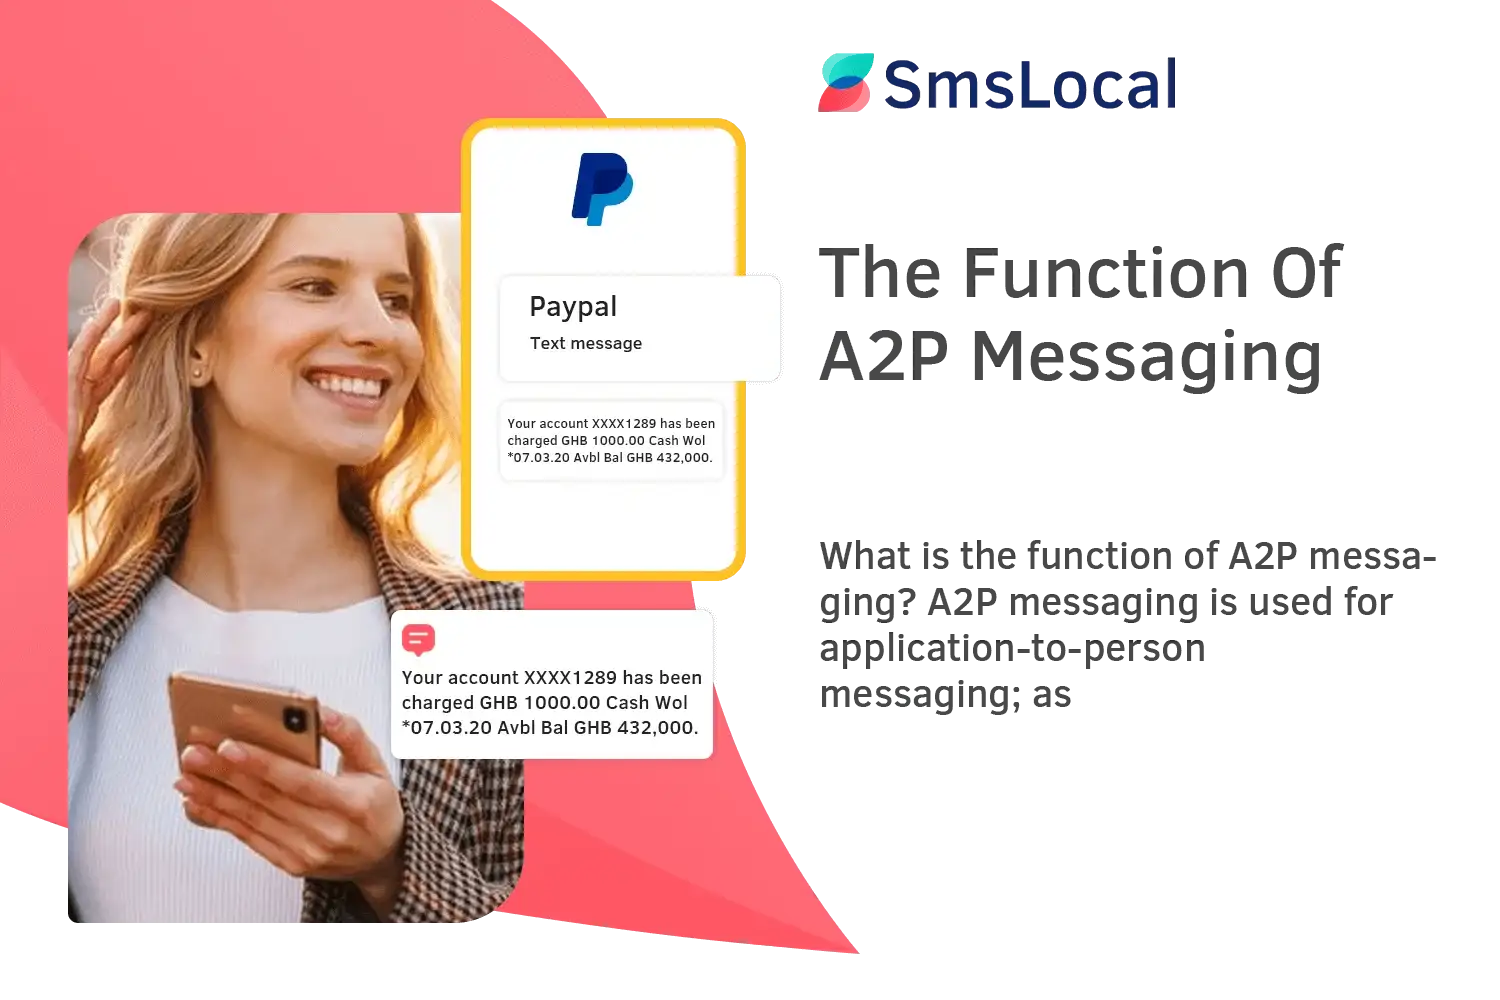 The-Function-Of-A2P-Messaging-1-1 (1)